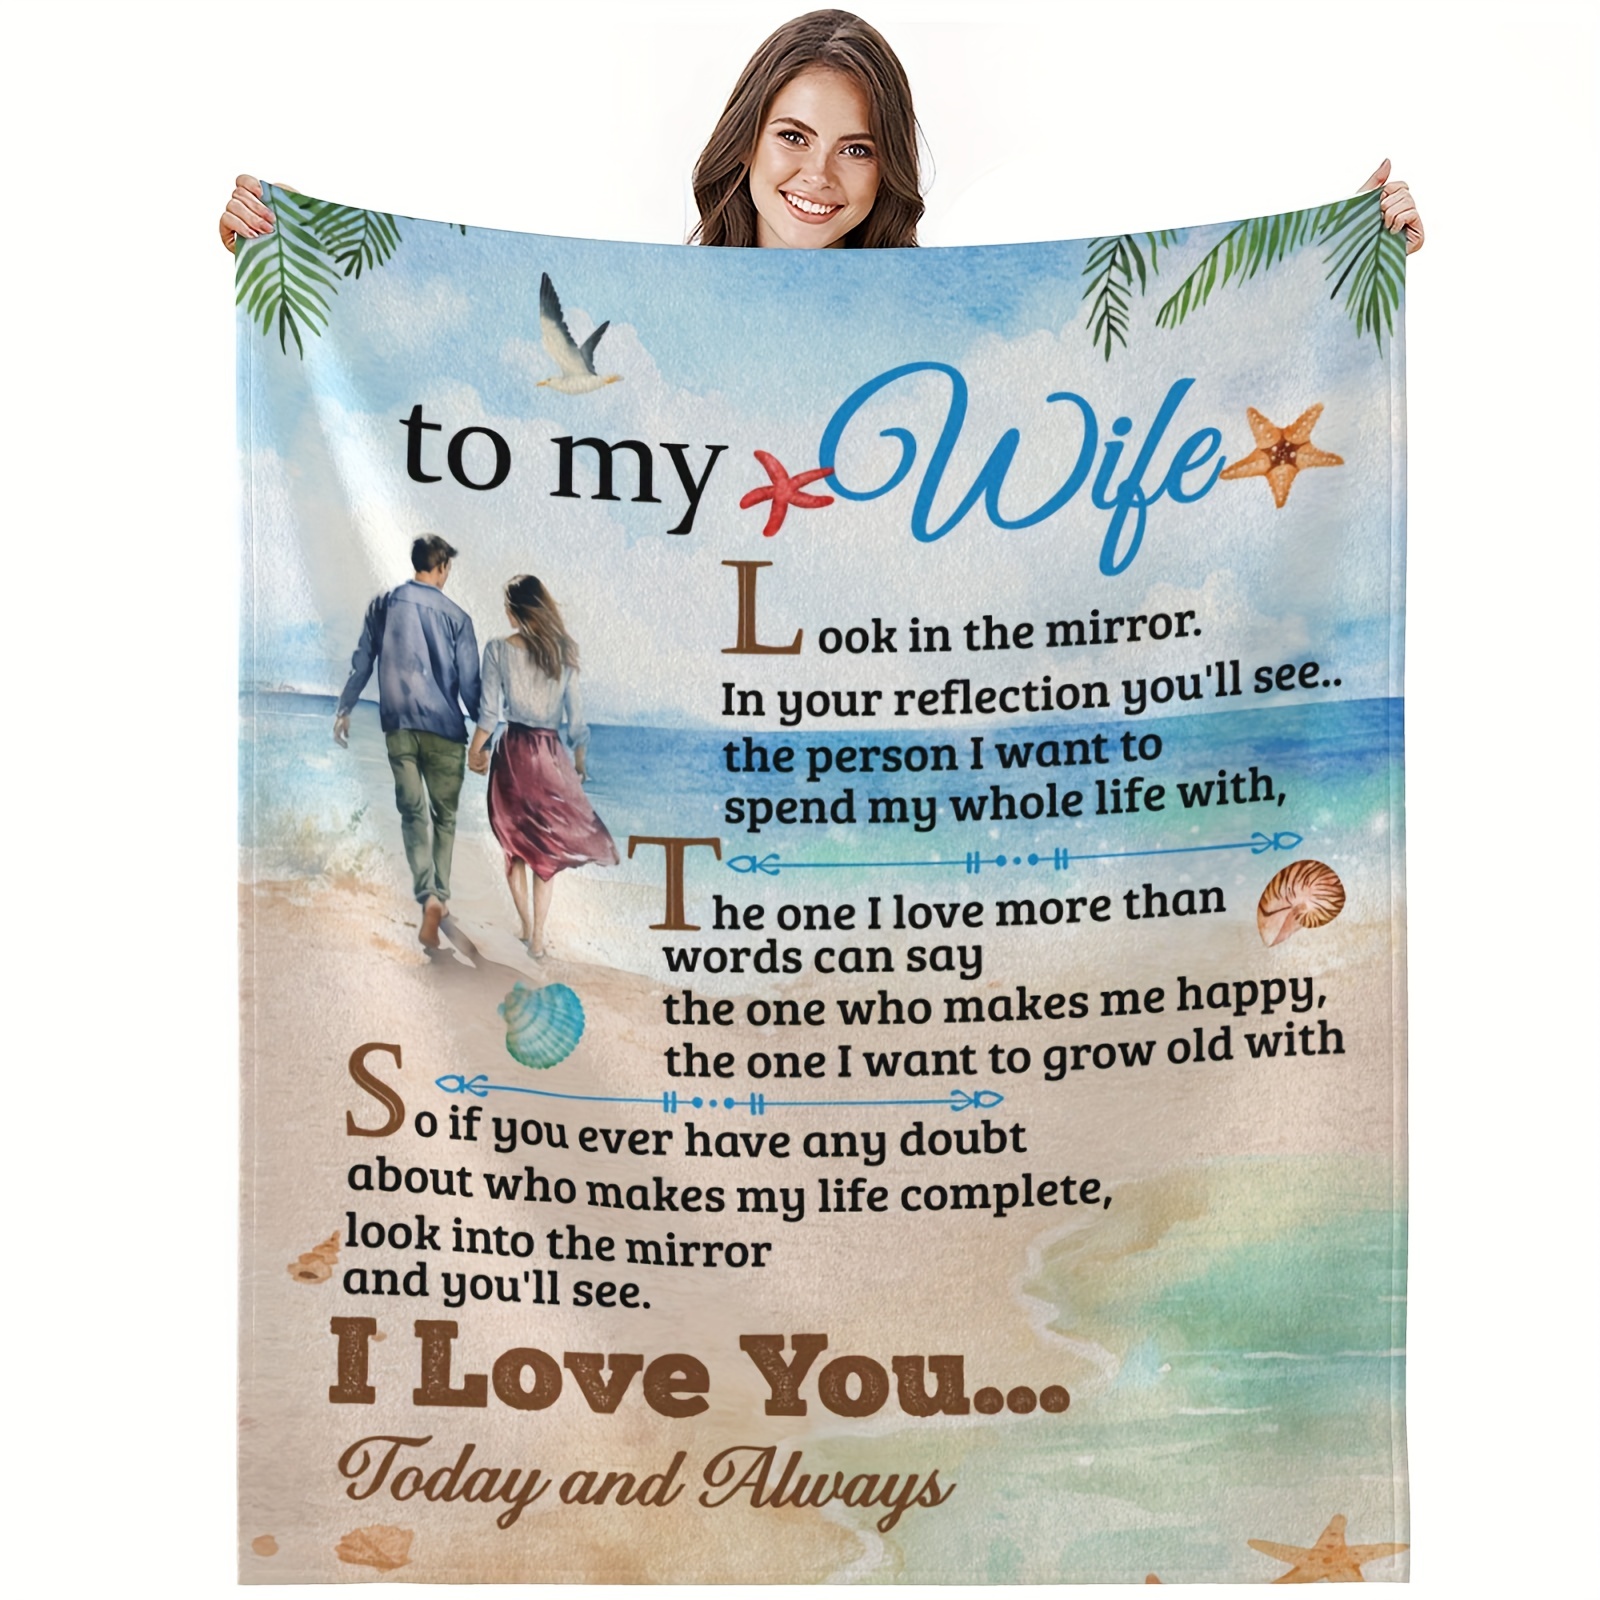 Birthday Gifts for Wife, Anniversary Gifts for Wife, Romantic Gifts for  Her, Mother's Day Gift for Wife, Wedding Gift From Husband 